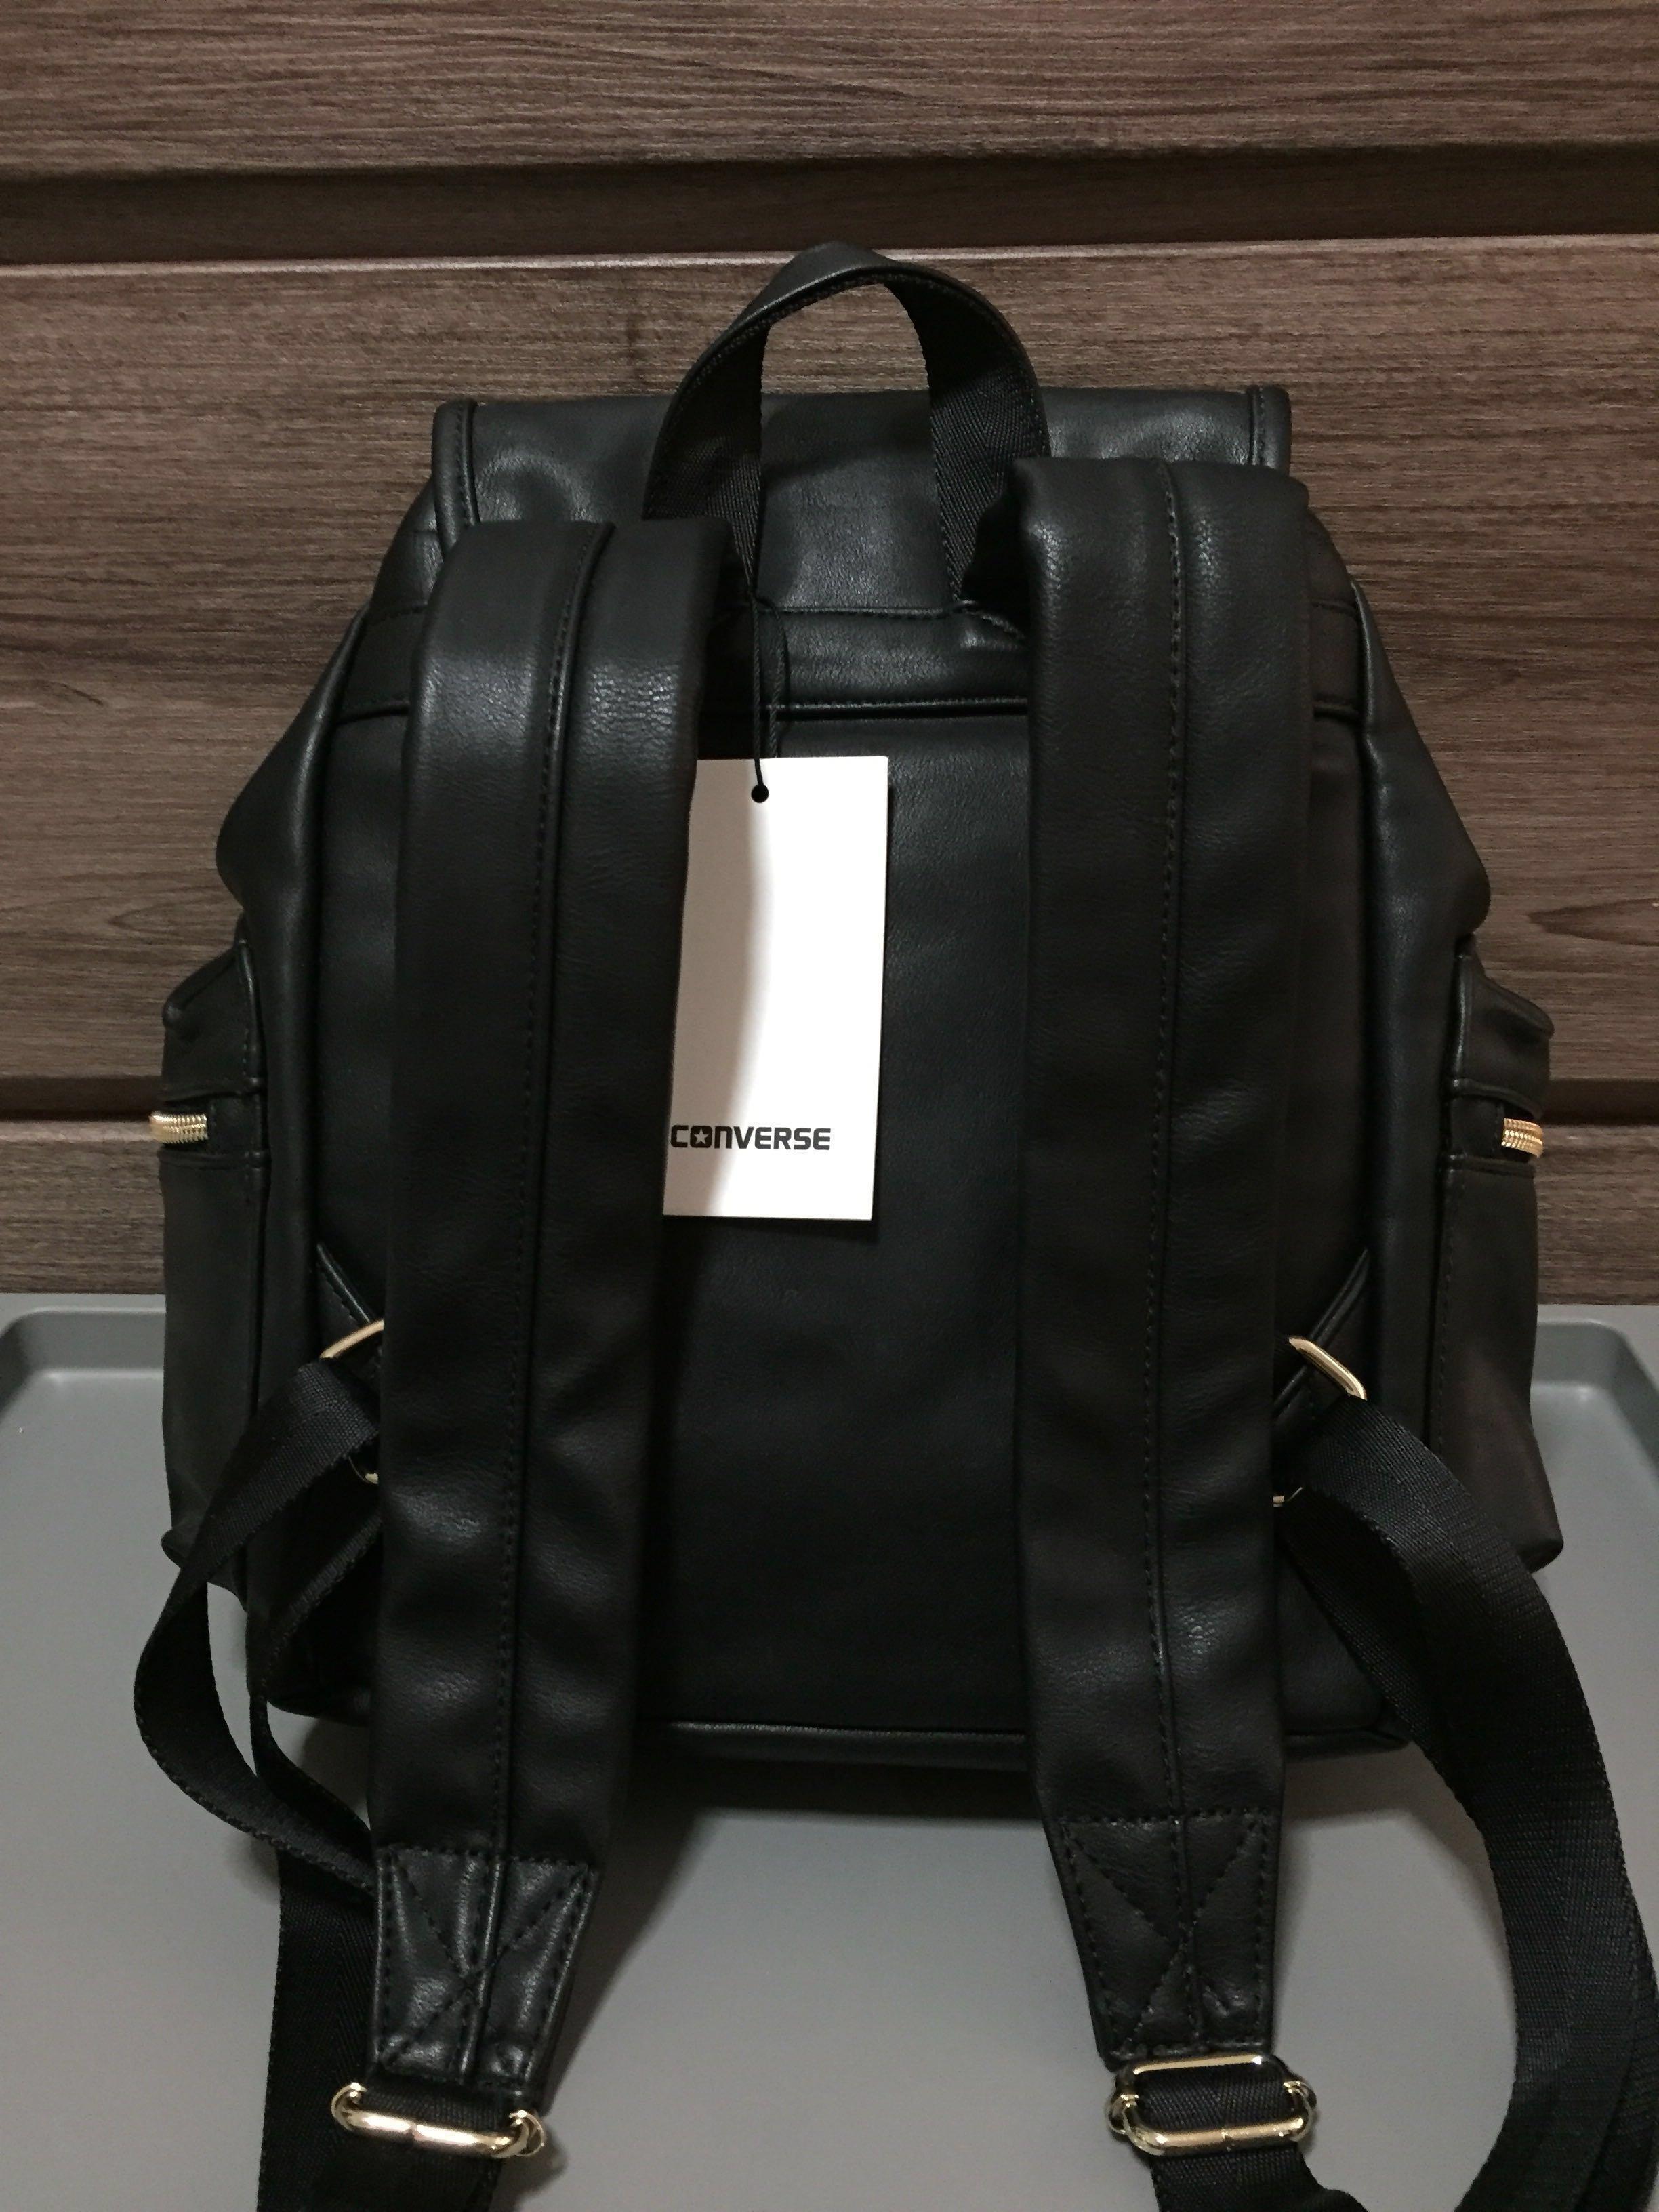 converse leather backpack